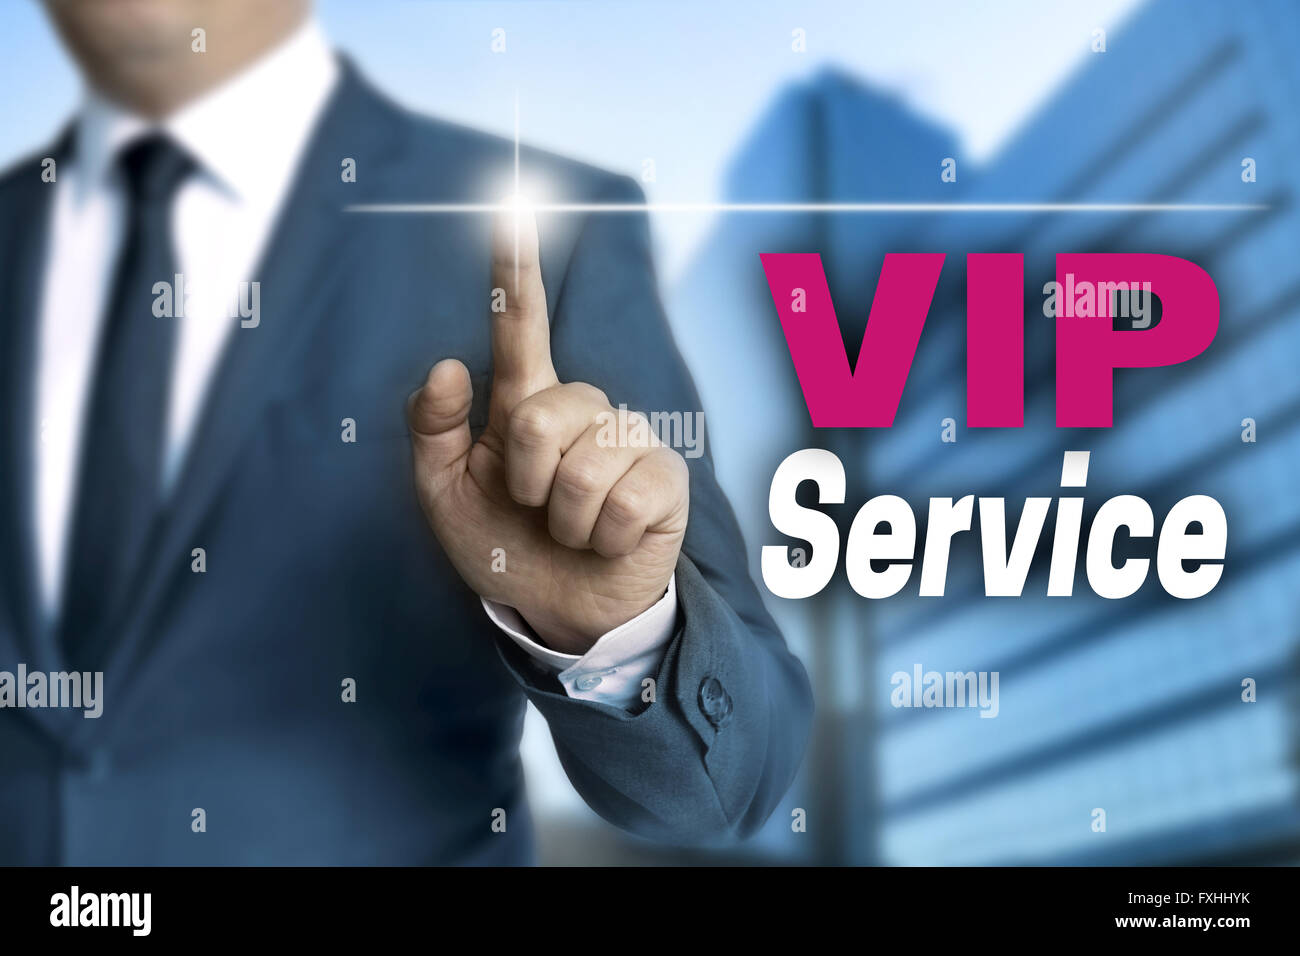 vip service touchscreen is operated by businessman. Stock Photo